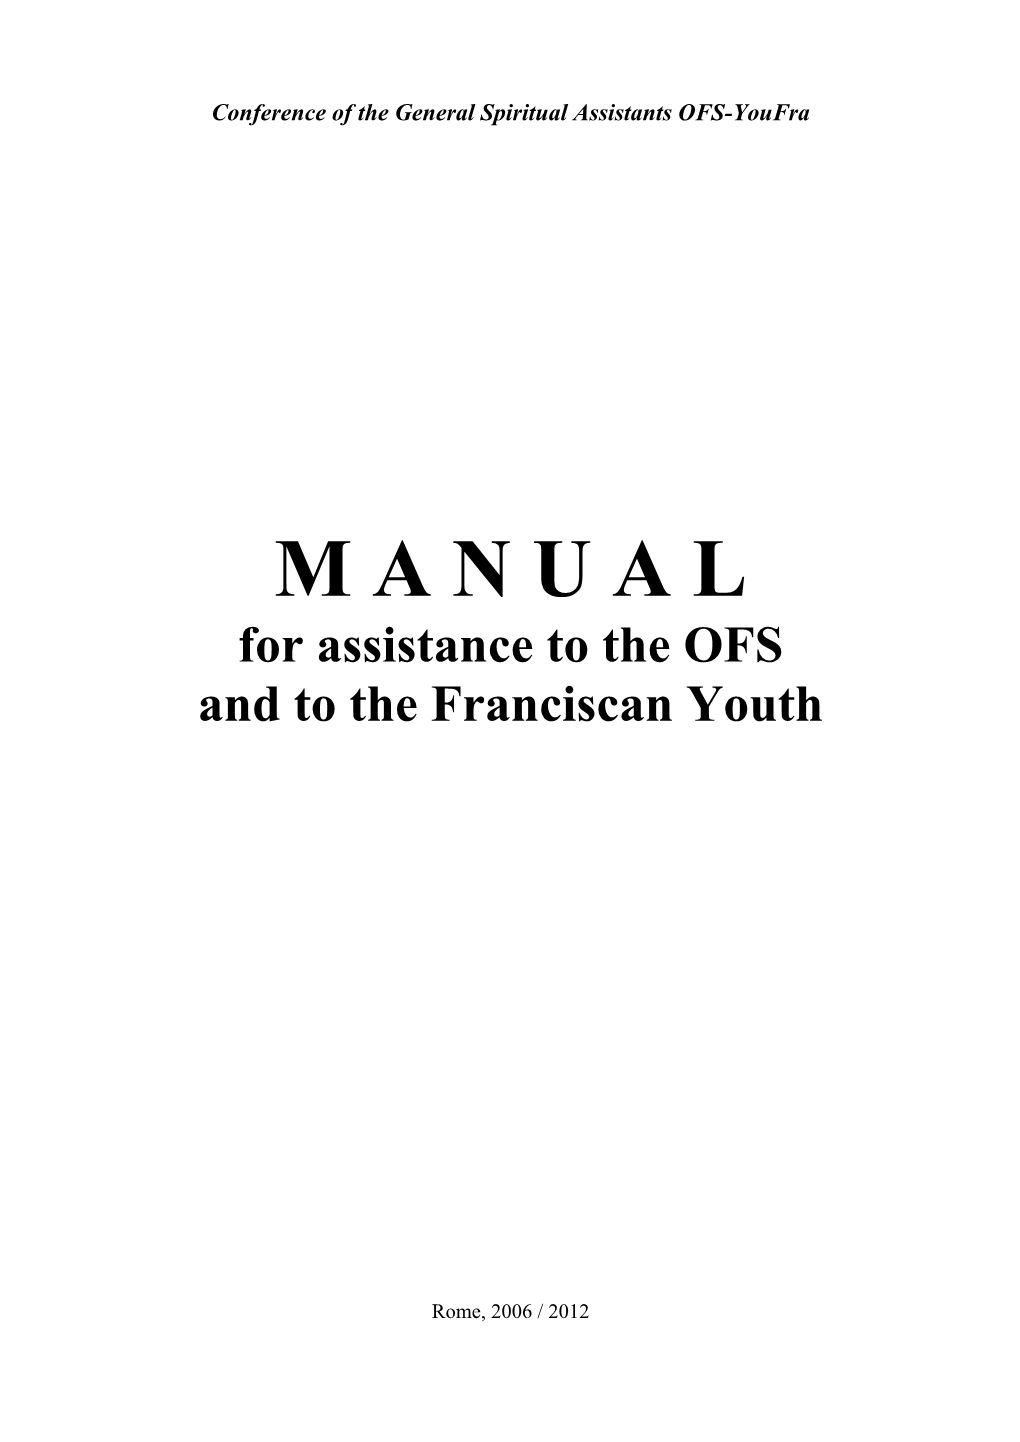 The Manual for Assistance to the SFO and to the Franciscan Youth